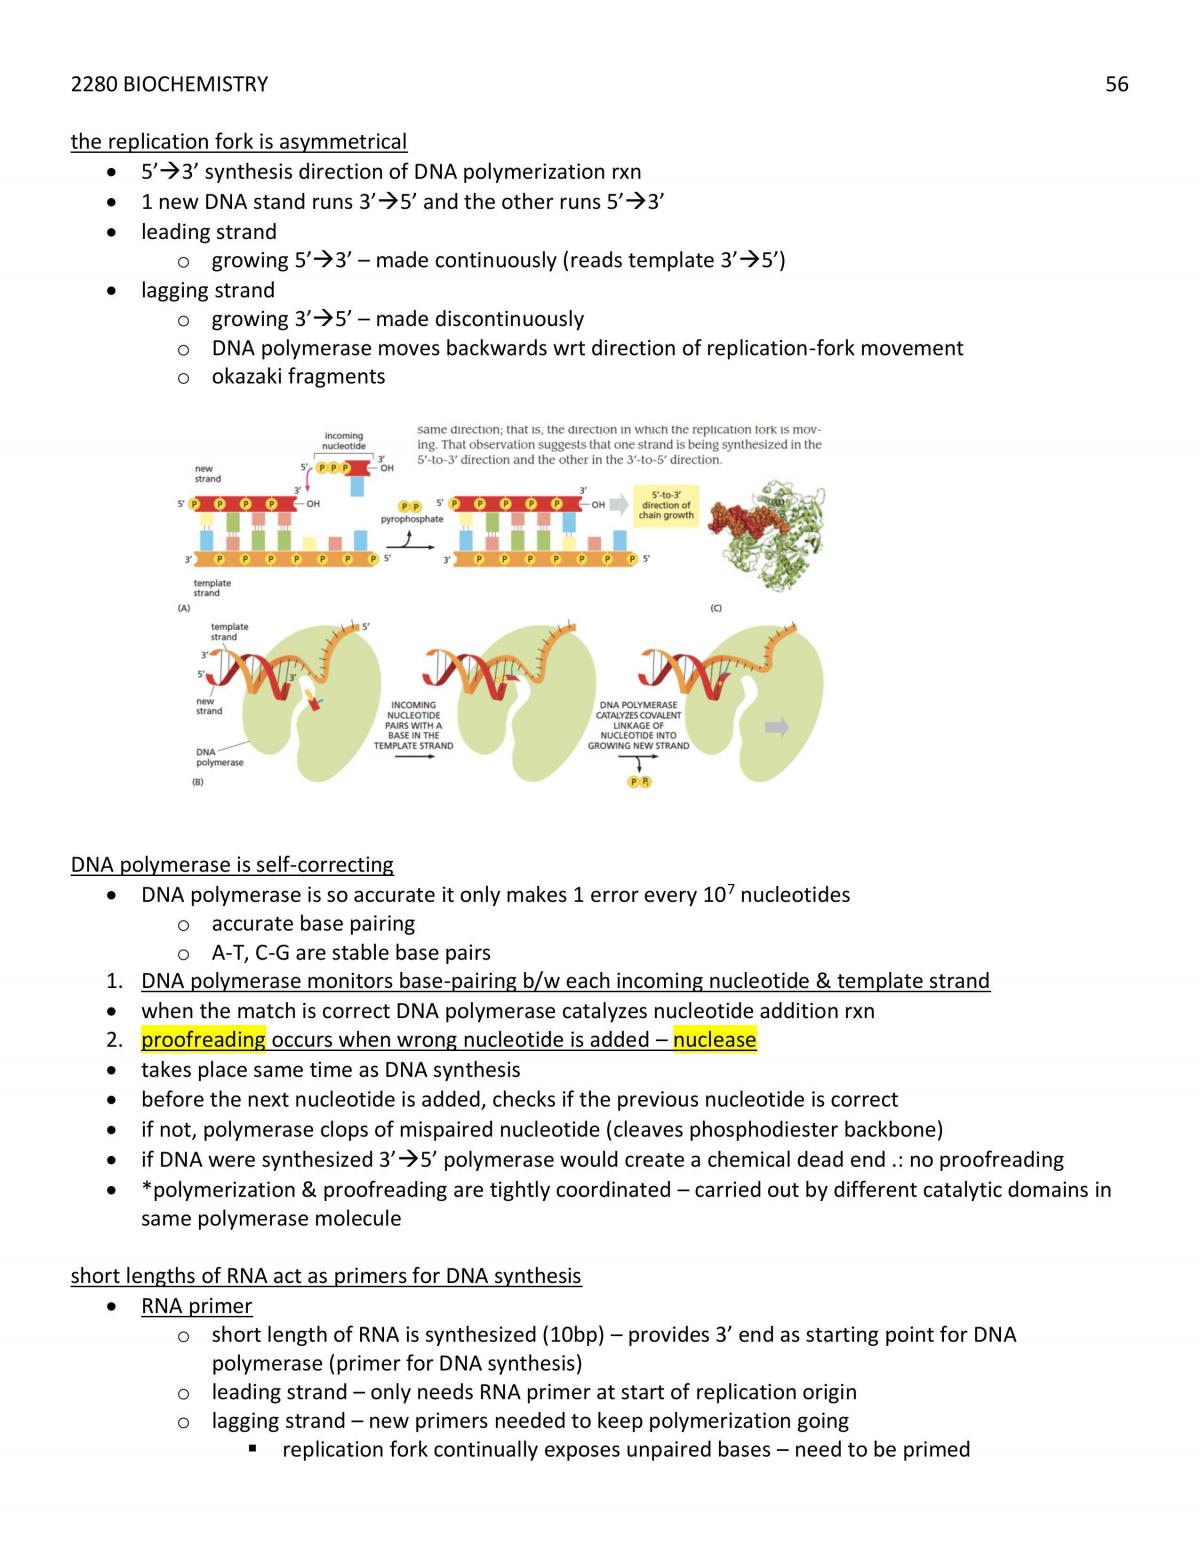 Complete 2280 Biochemistry Notes - Page 56